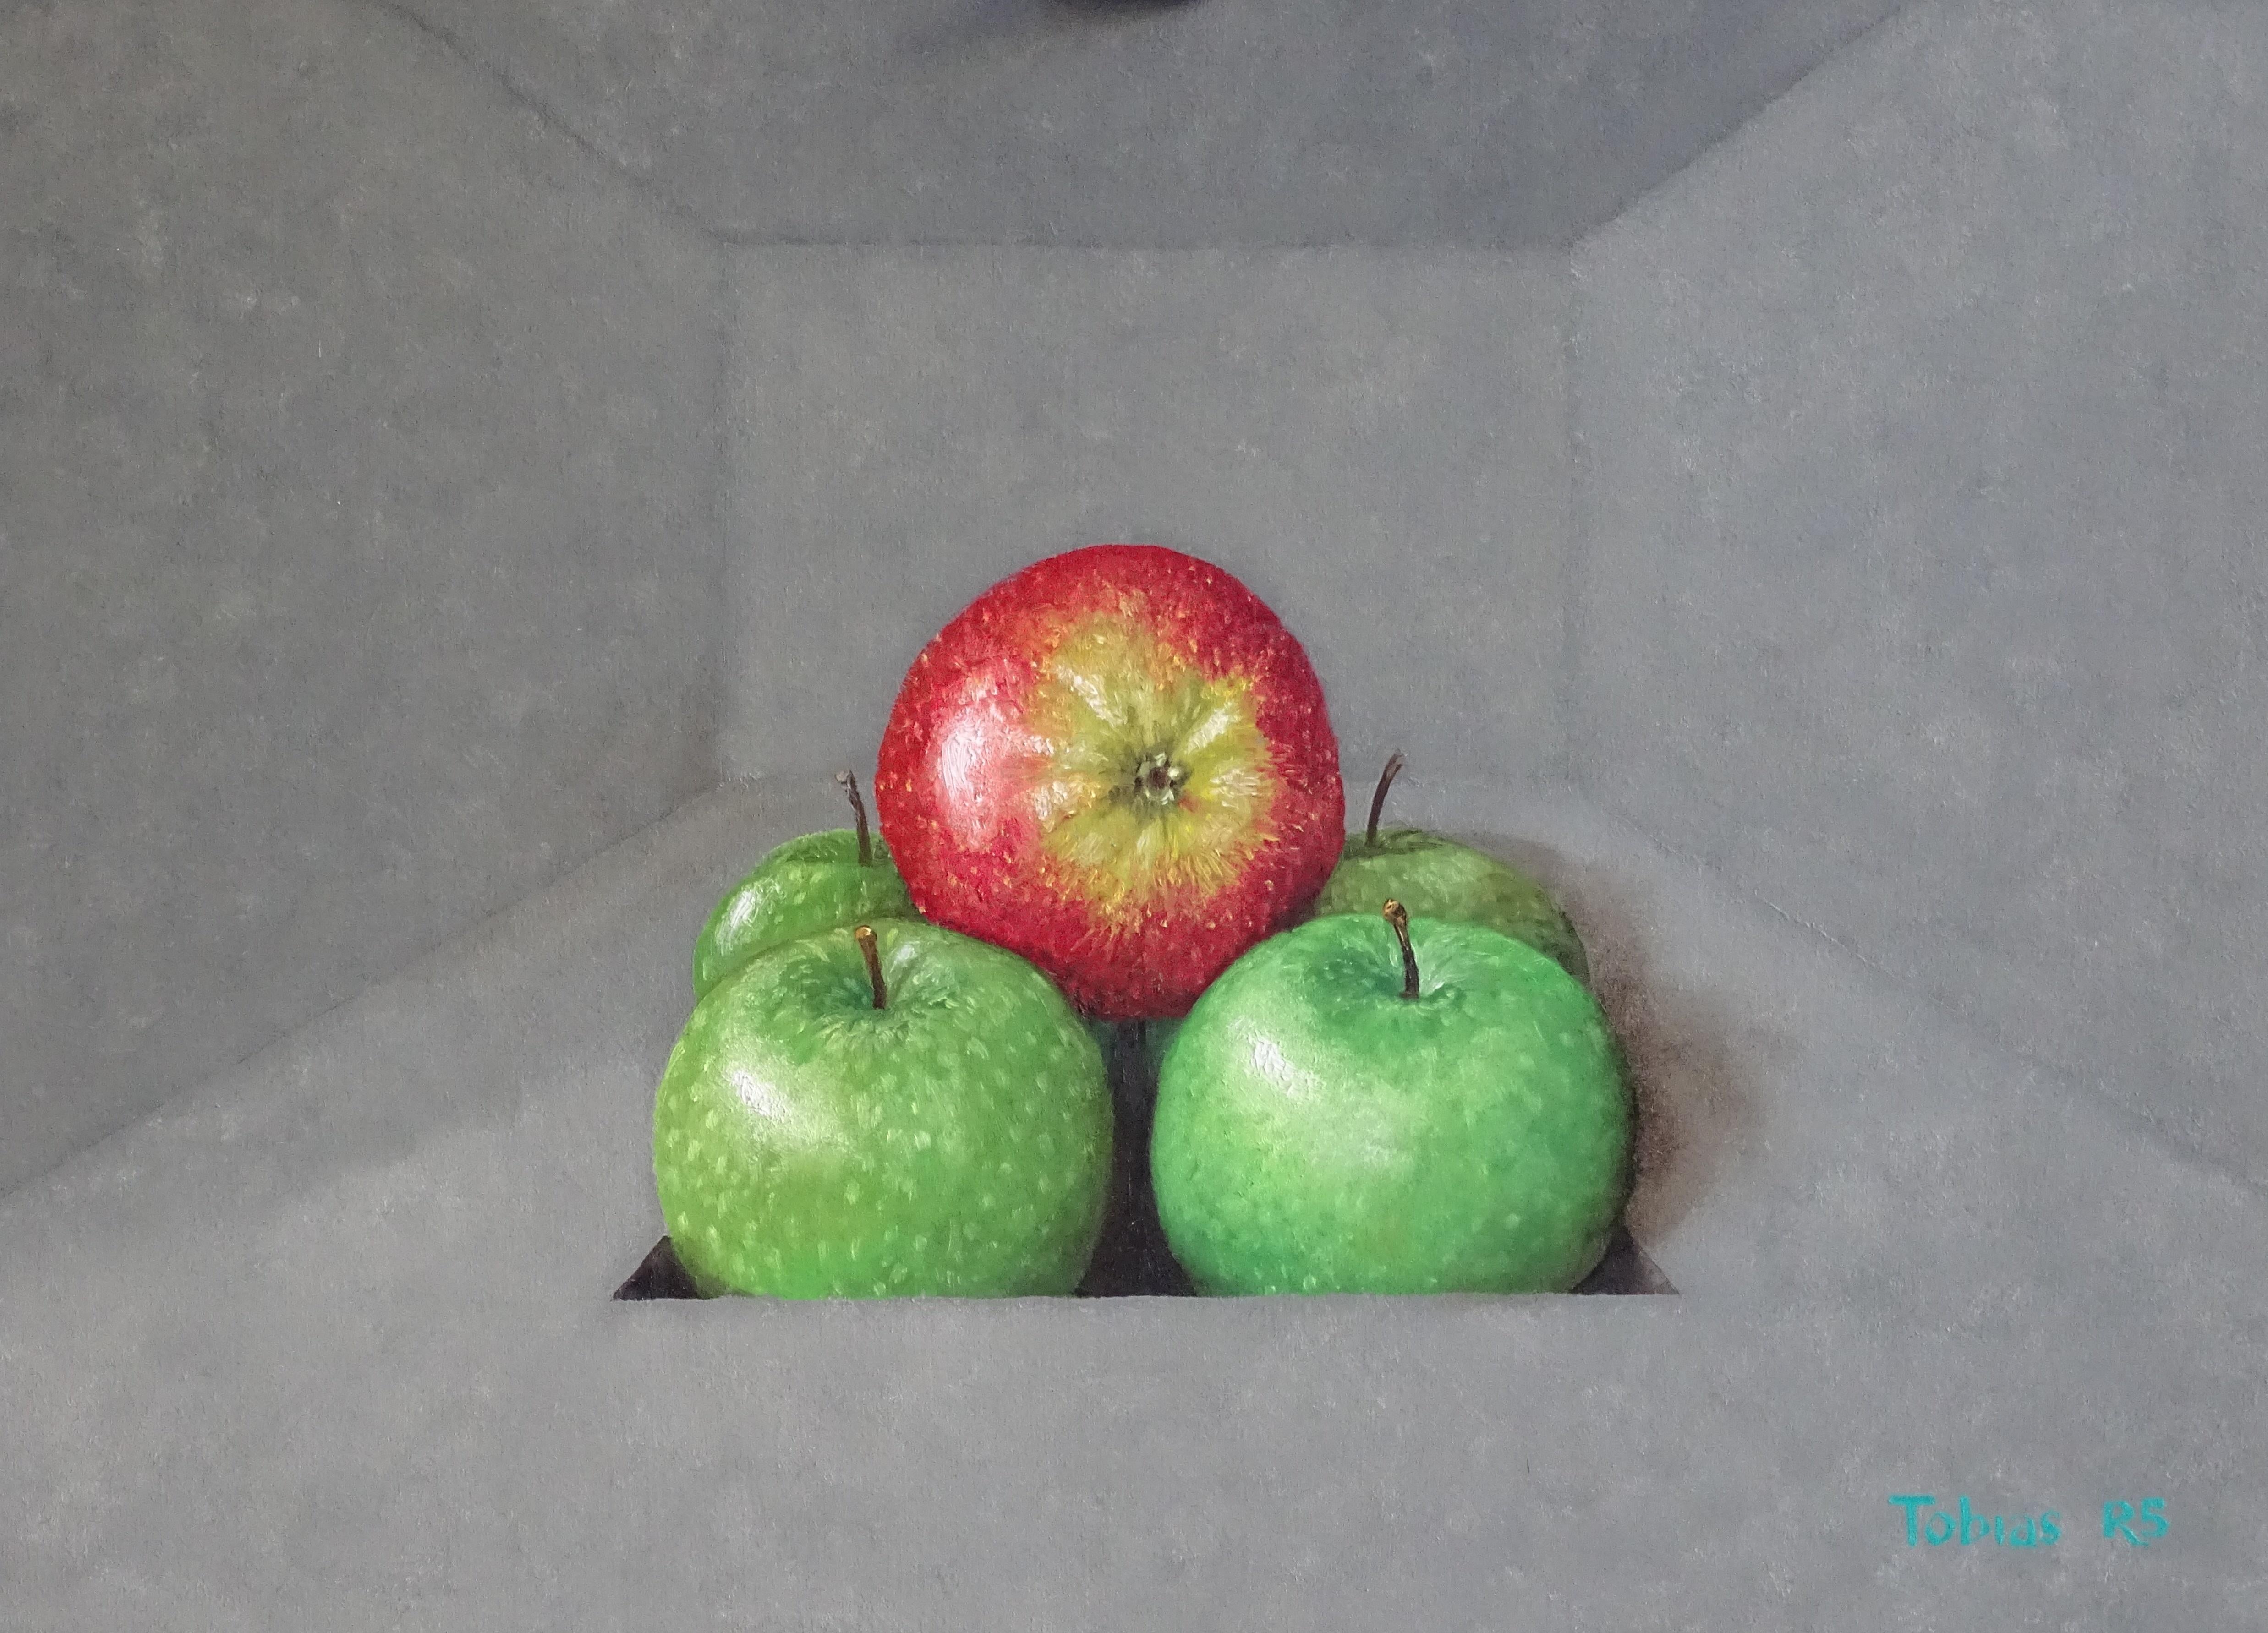 British Contemporary Art by Tobias Harrison - Room For Apples